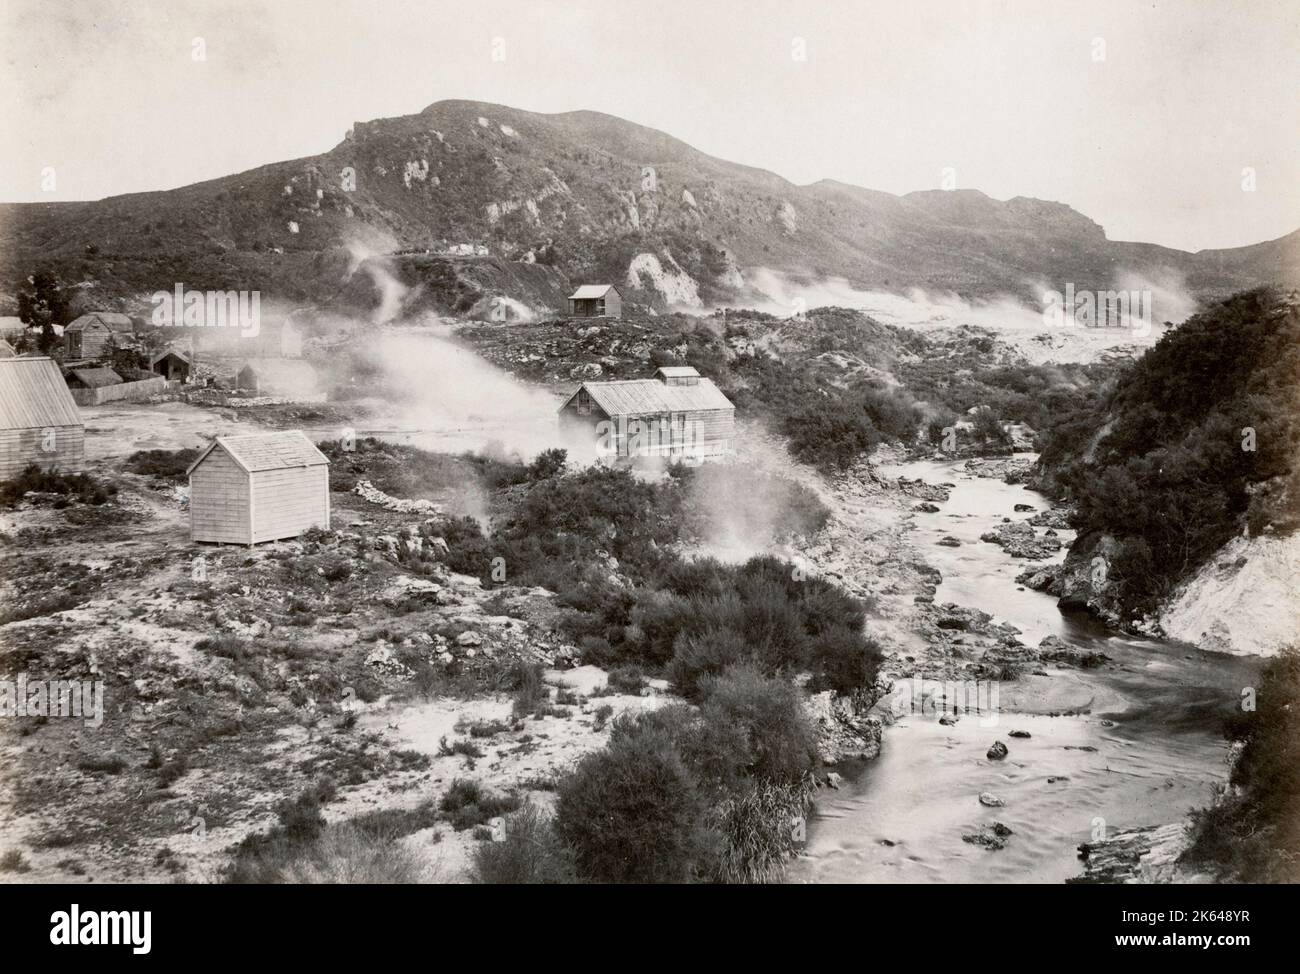 19th century vintage photograph - view of Whakarewarewa c.1880's. This is now is a sprawling area home to the Te Puia geothermal preserve, with its Maori cultural centre, bubbling mud pots, and the spouting Pohutu Geyser. Stock Photo